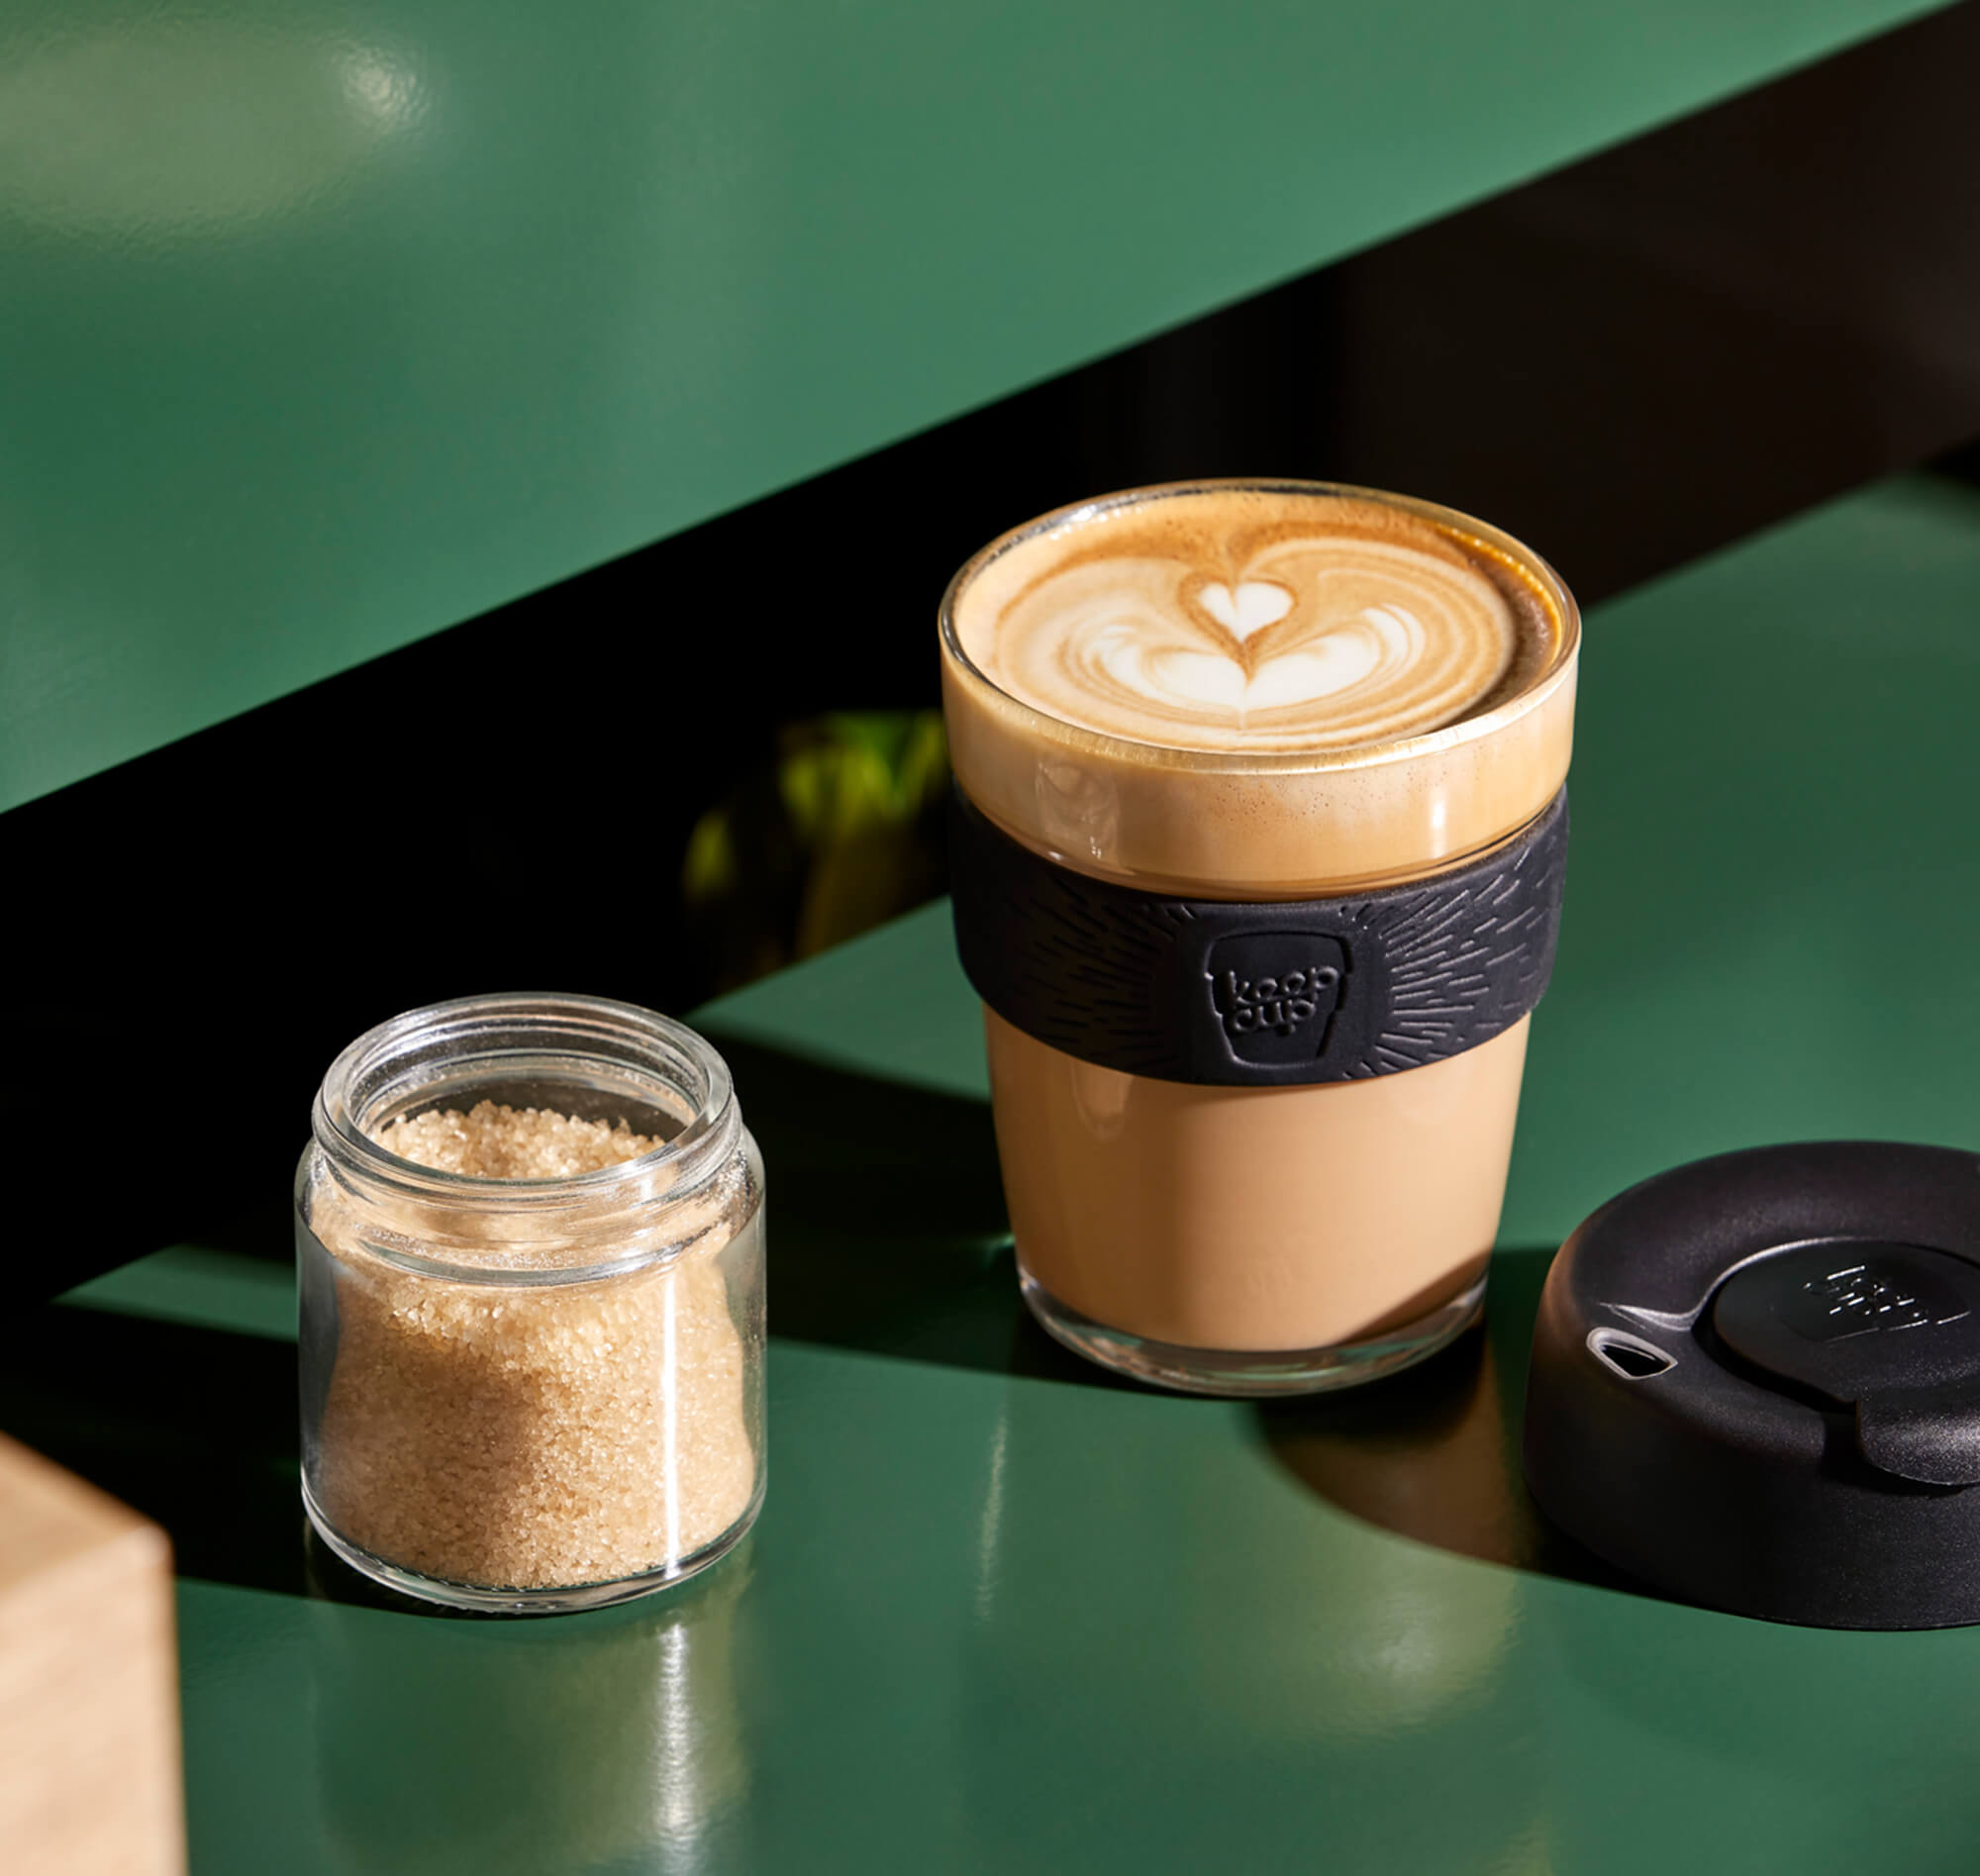 KeepCup Brew Glass 340ml Reusable Travel Coffee Cup